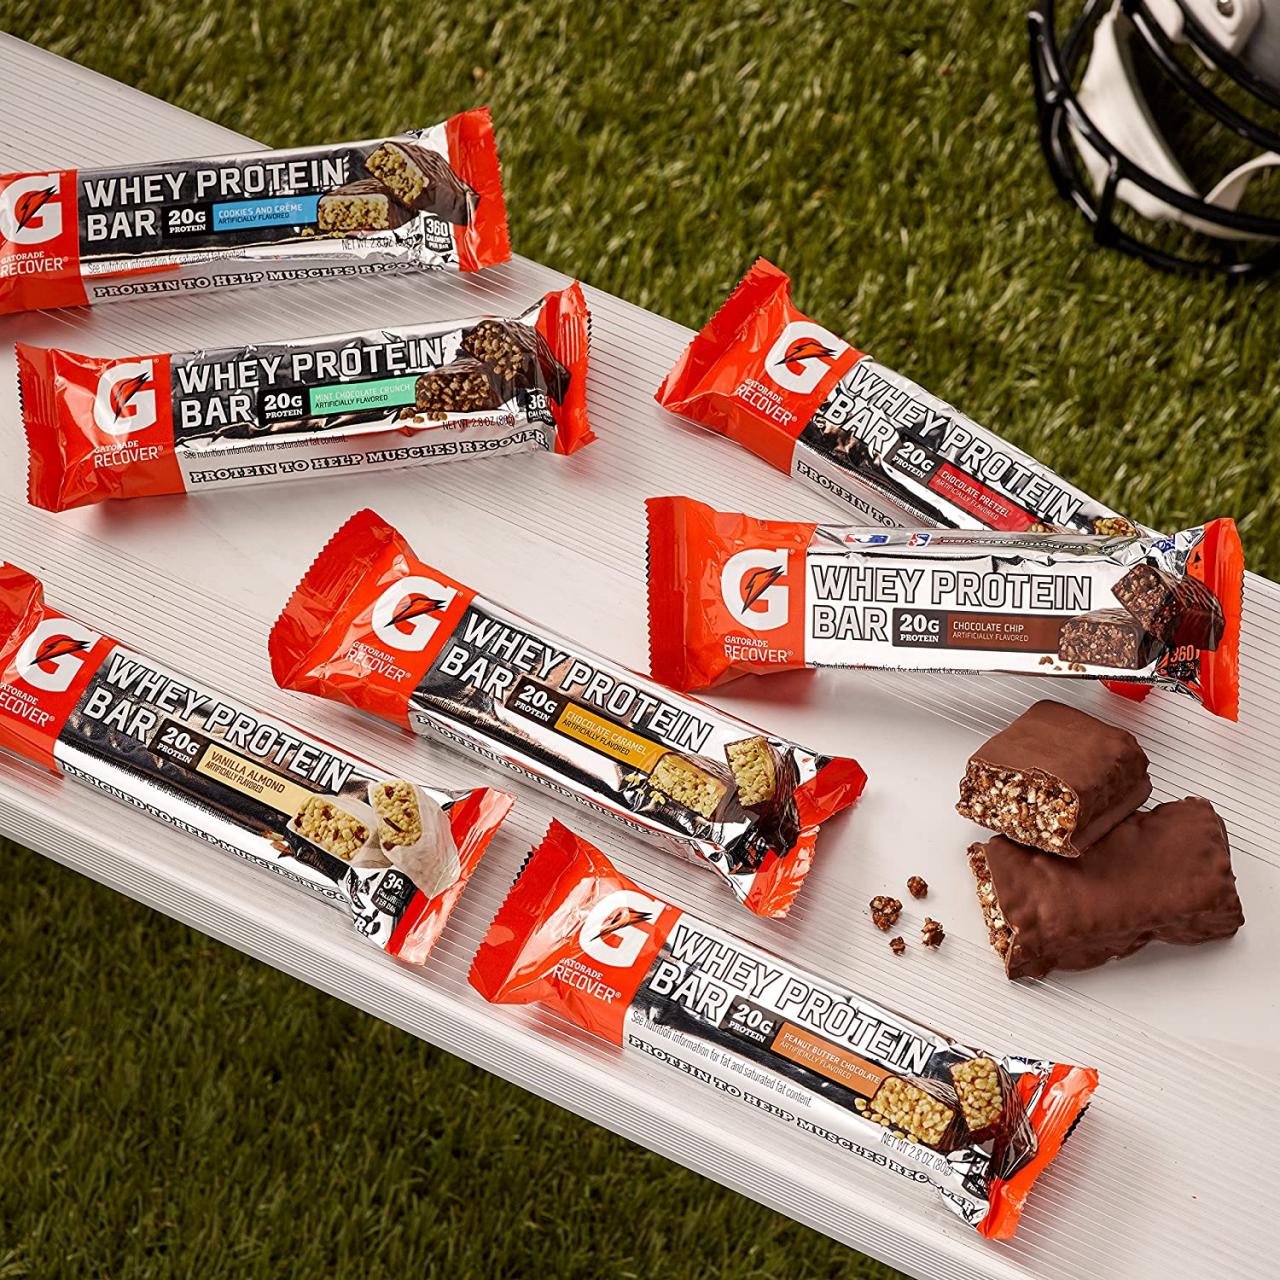 https://food.fnr.sndimg.com/content/dam/images/food/products/2022/7/1/rx_gatorade-whey-protein-bar.jpeg.rend.hgtvcom.1280.1280.suffix/1656699923417.jpeg